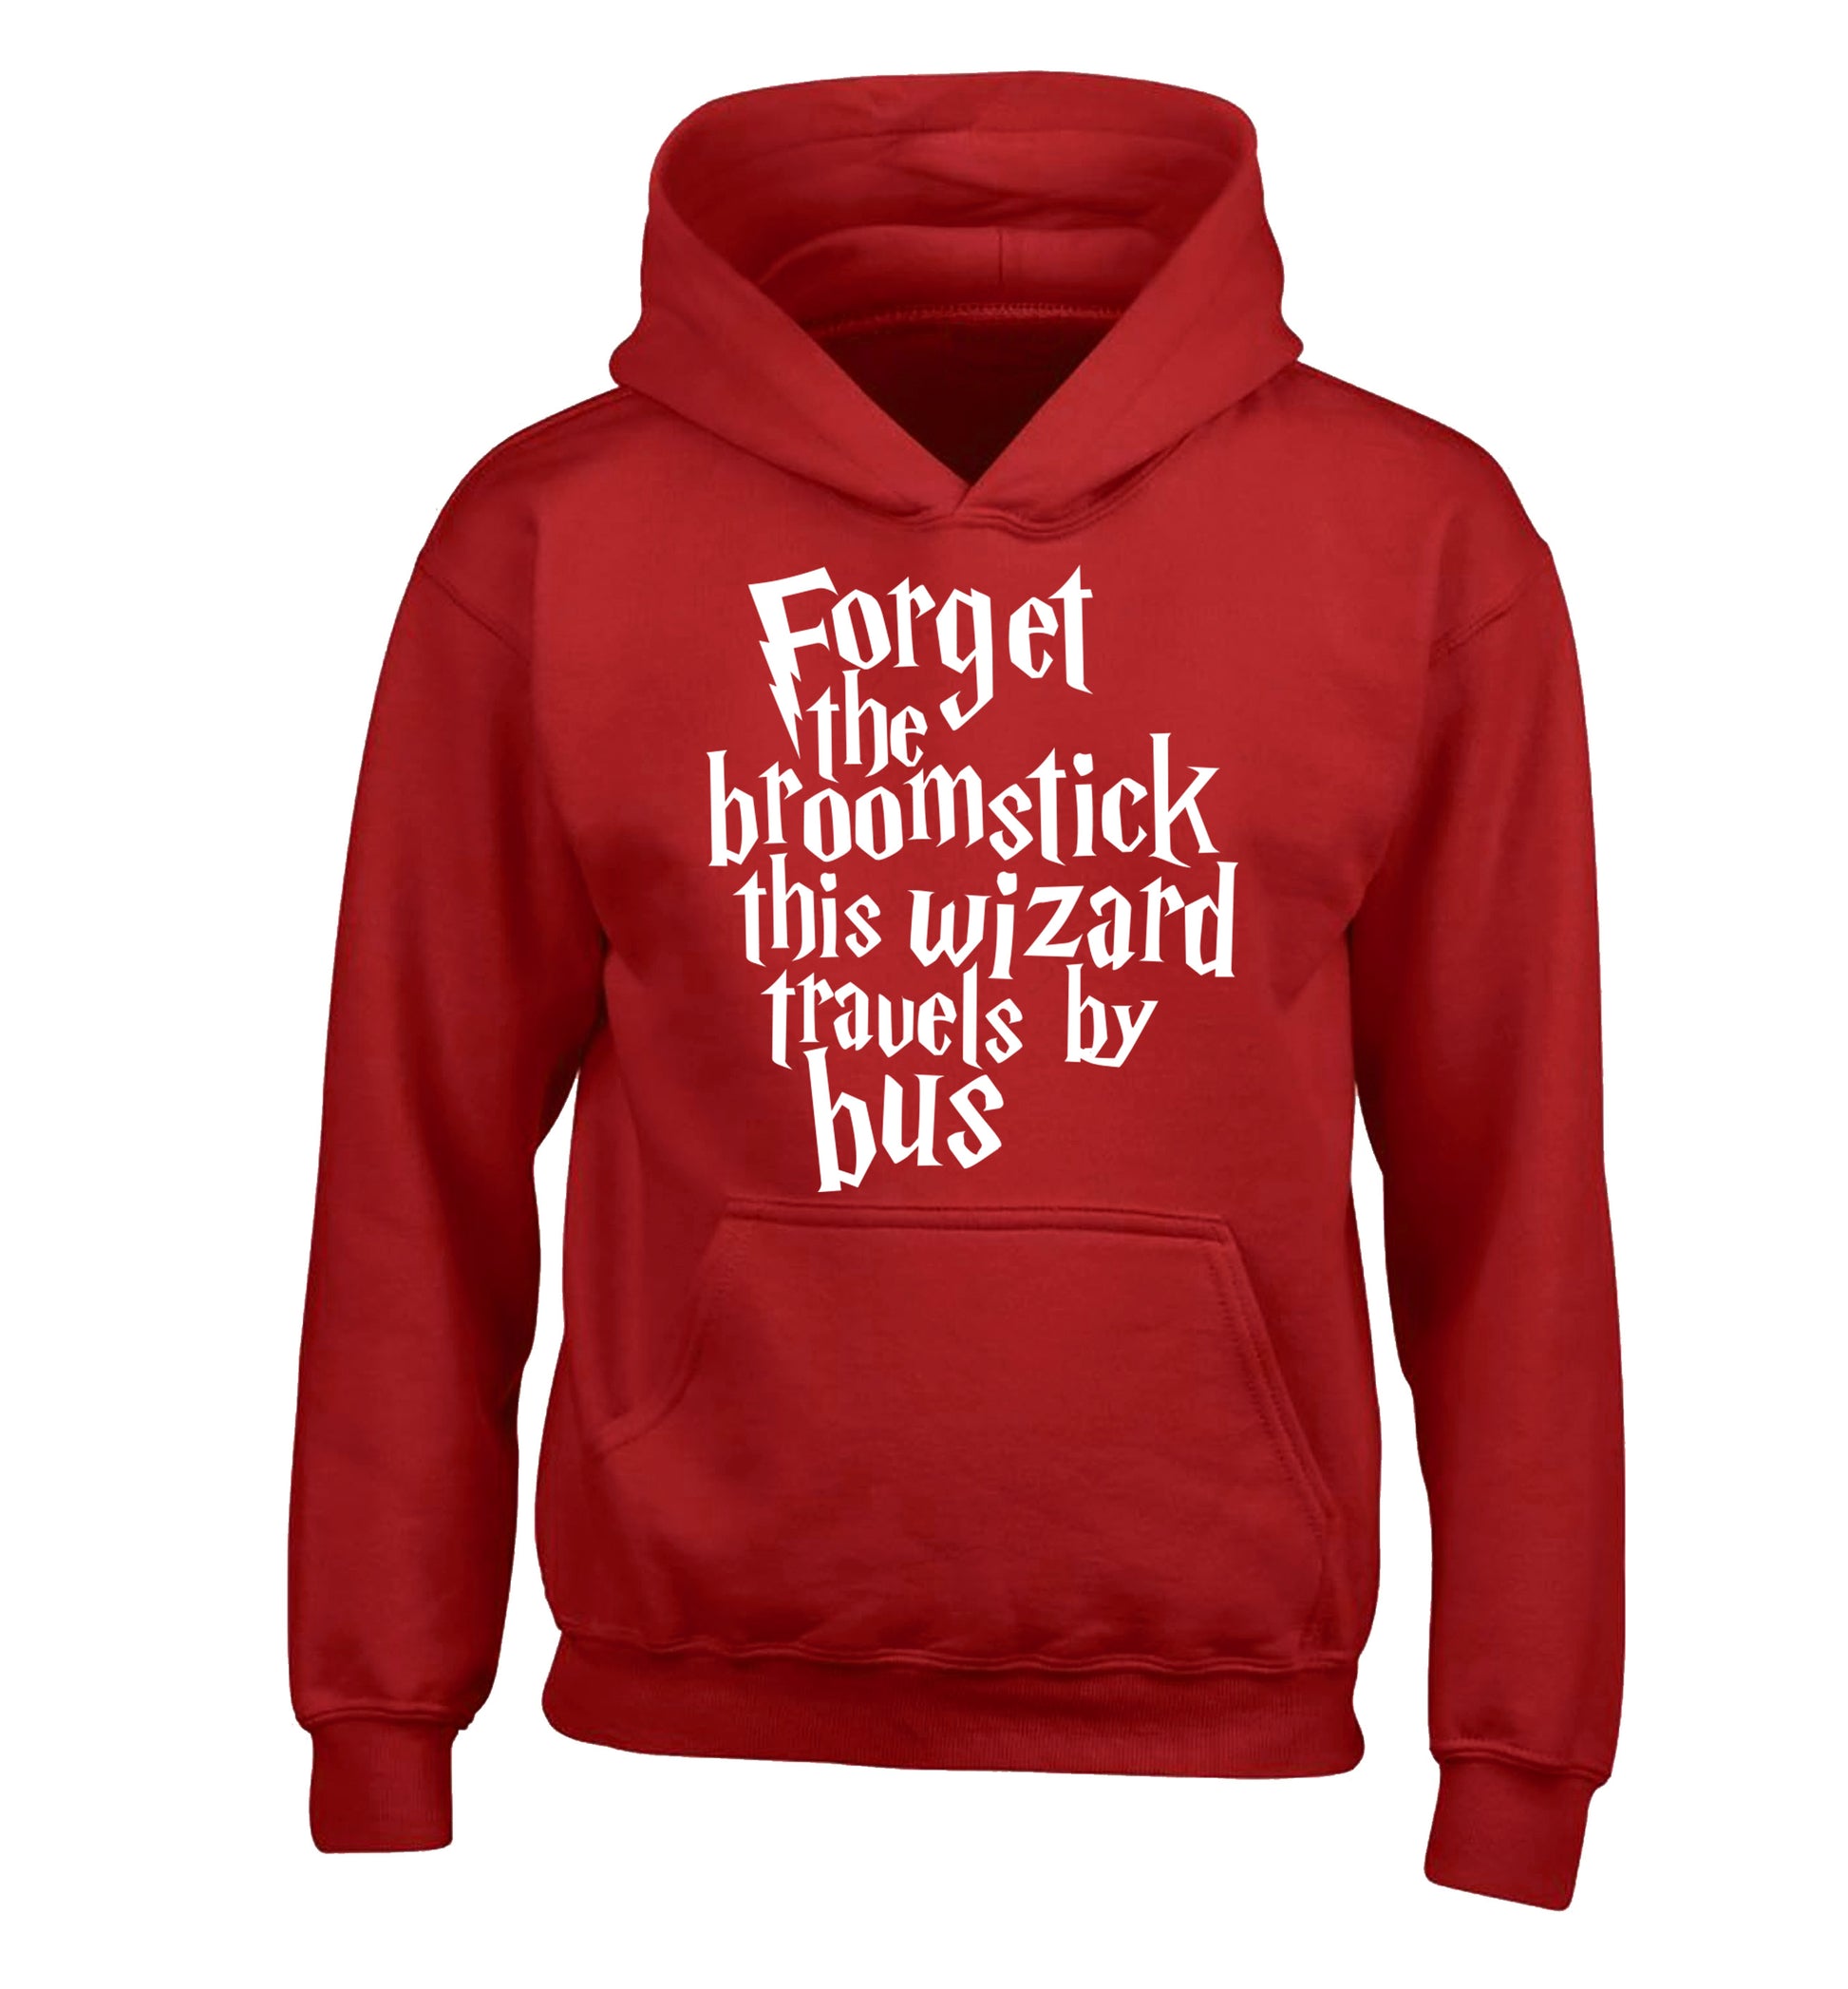 Forget the broomstick this wizard travels by bus children's red hoodie 12-14 Years